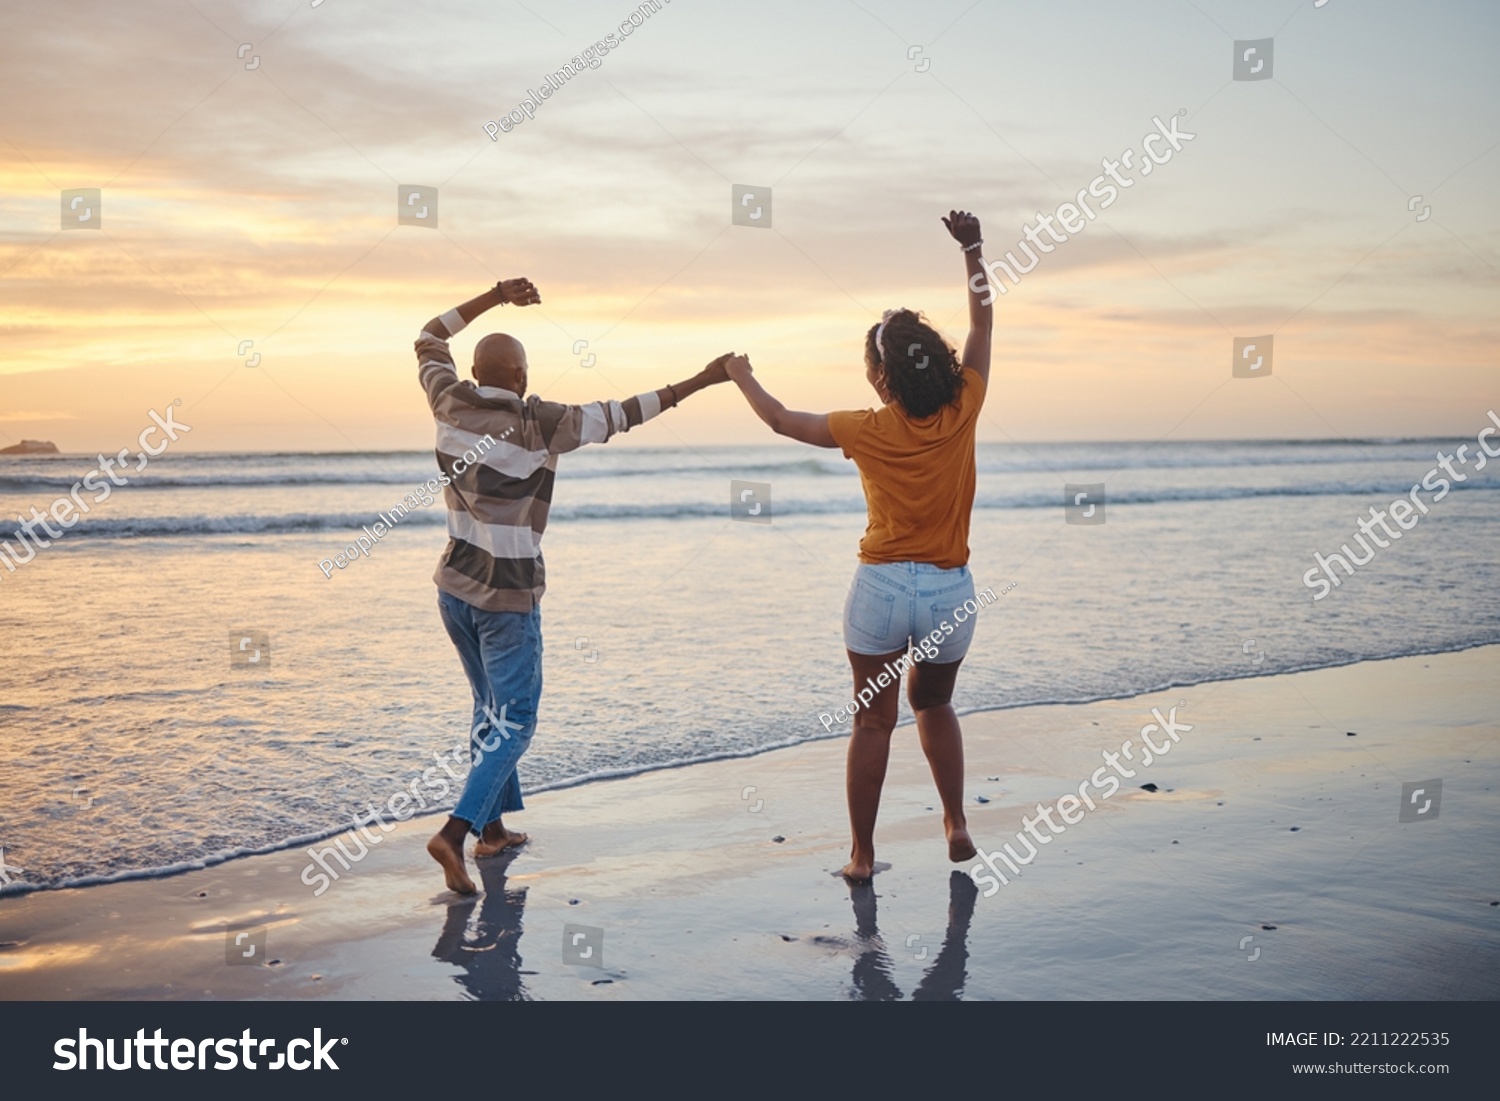 Love, travel and happy couple at beach enjoying summer vacation or fun honeymoon at sunset while holding hands and being playful. Laughing, energy and seaside holiday with black man and woman at sea #2211222535